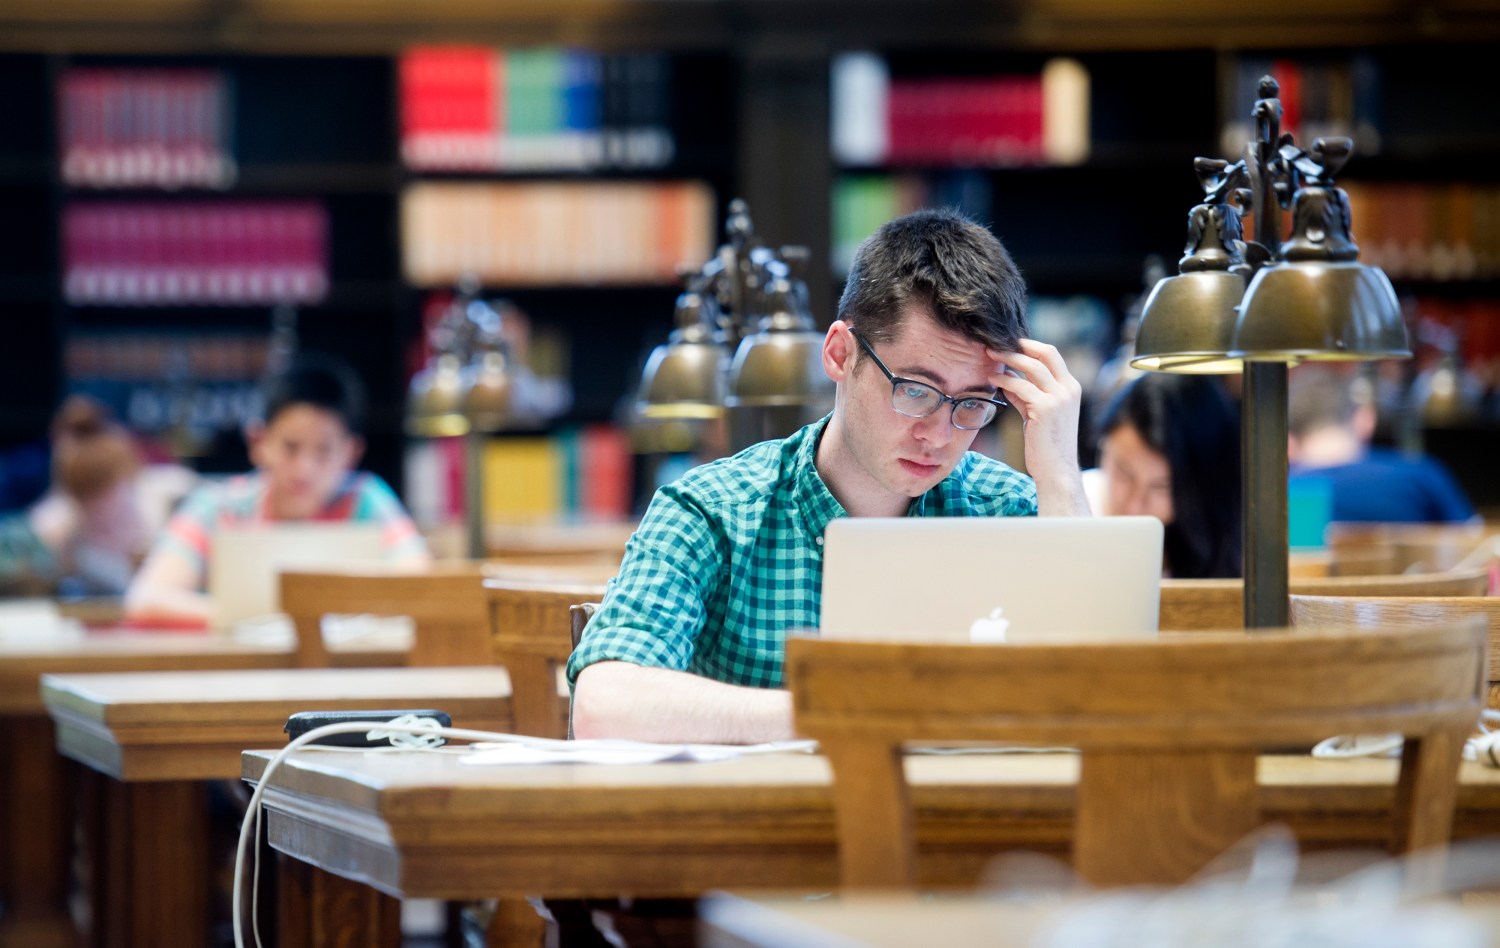 First-year law student Christopher Healy studies in Doe Library at the University of California at Berkeley in Berkeley, California May 12, 2014.    REUTERS/Noah Berger  (UNITED STATES - Tags: EDUCATION) - GF2EA5D0QYS01